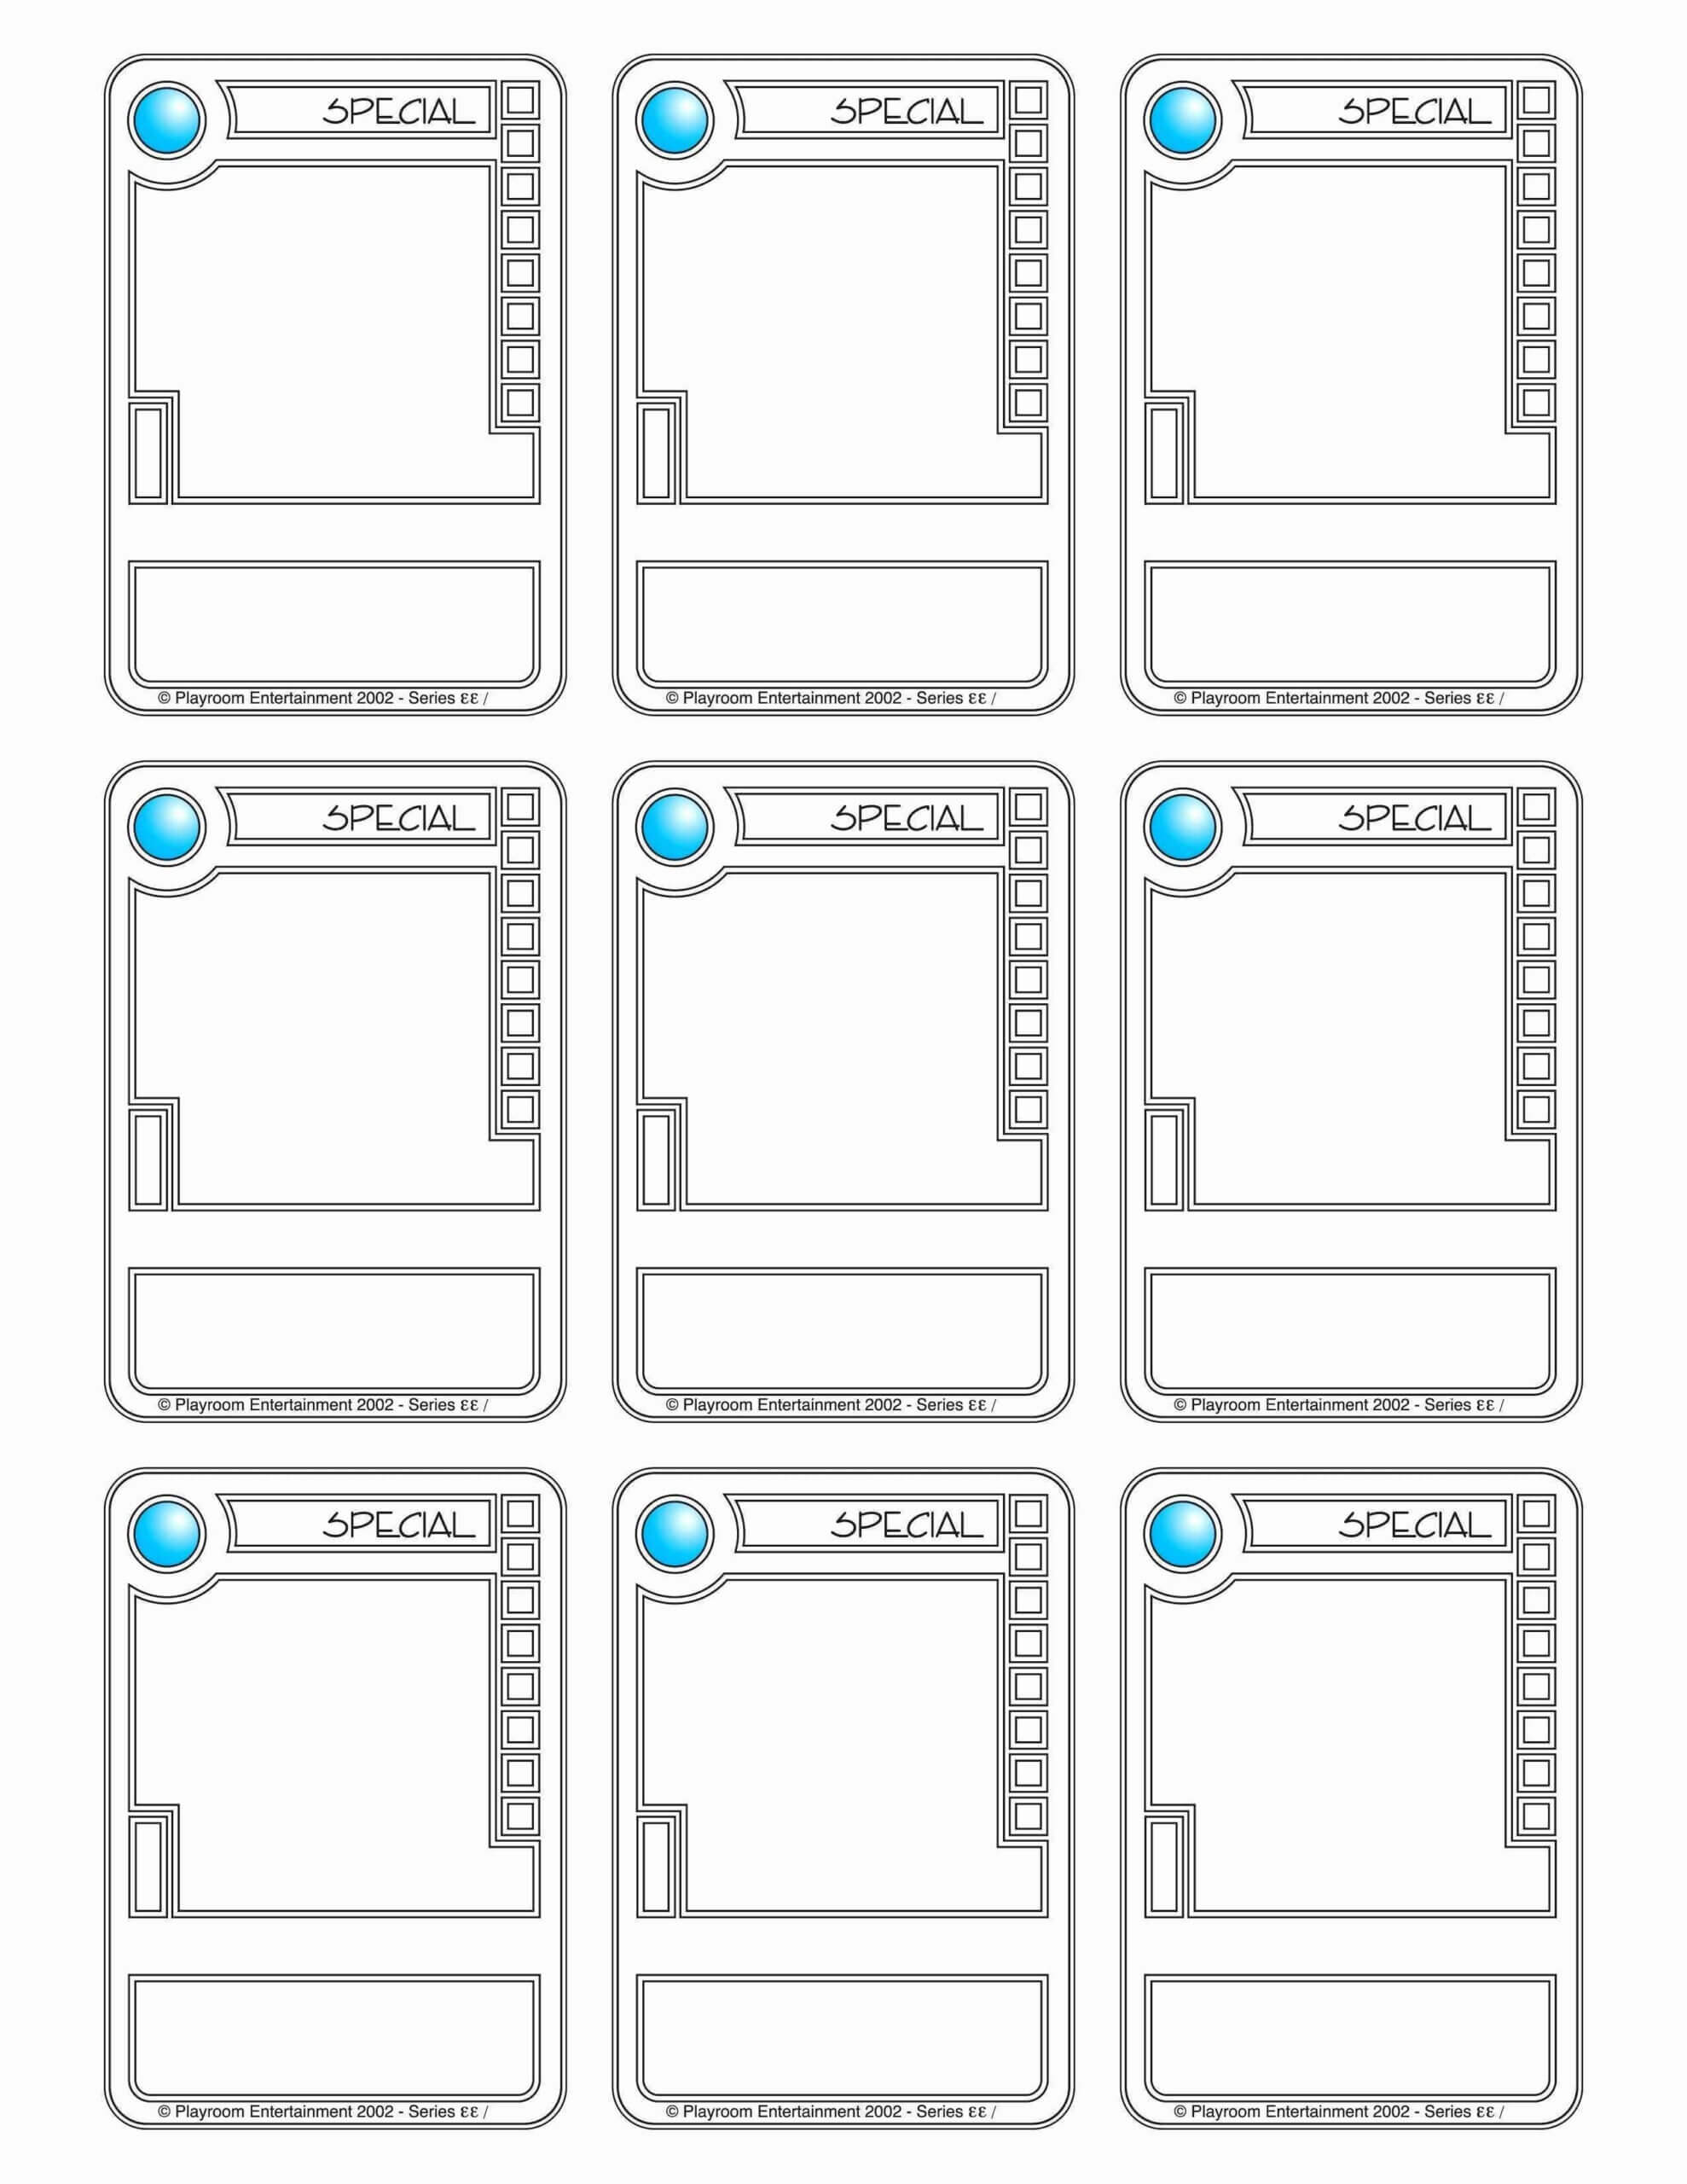 001 Trading Card Maker Free Examples Template For Success In Pertaining To Template For Game Cards